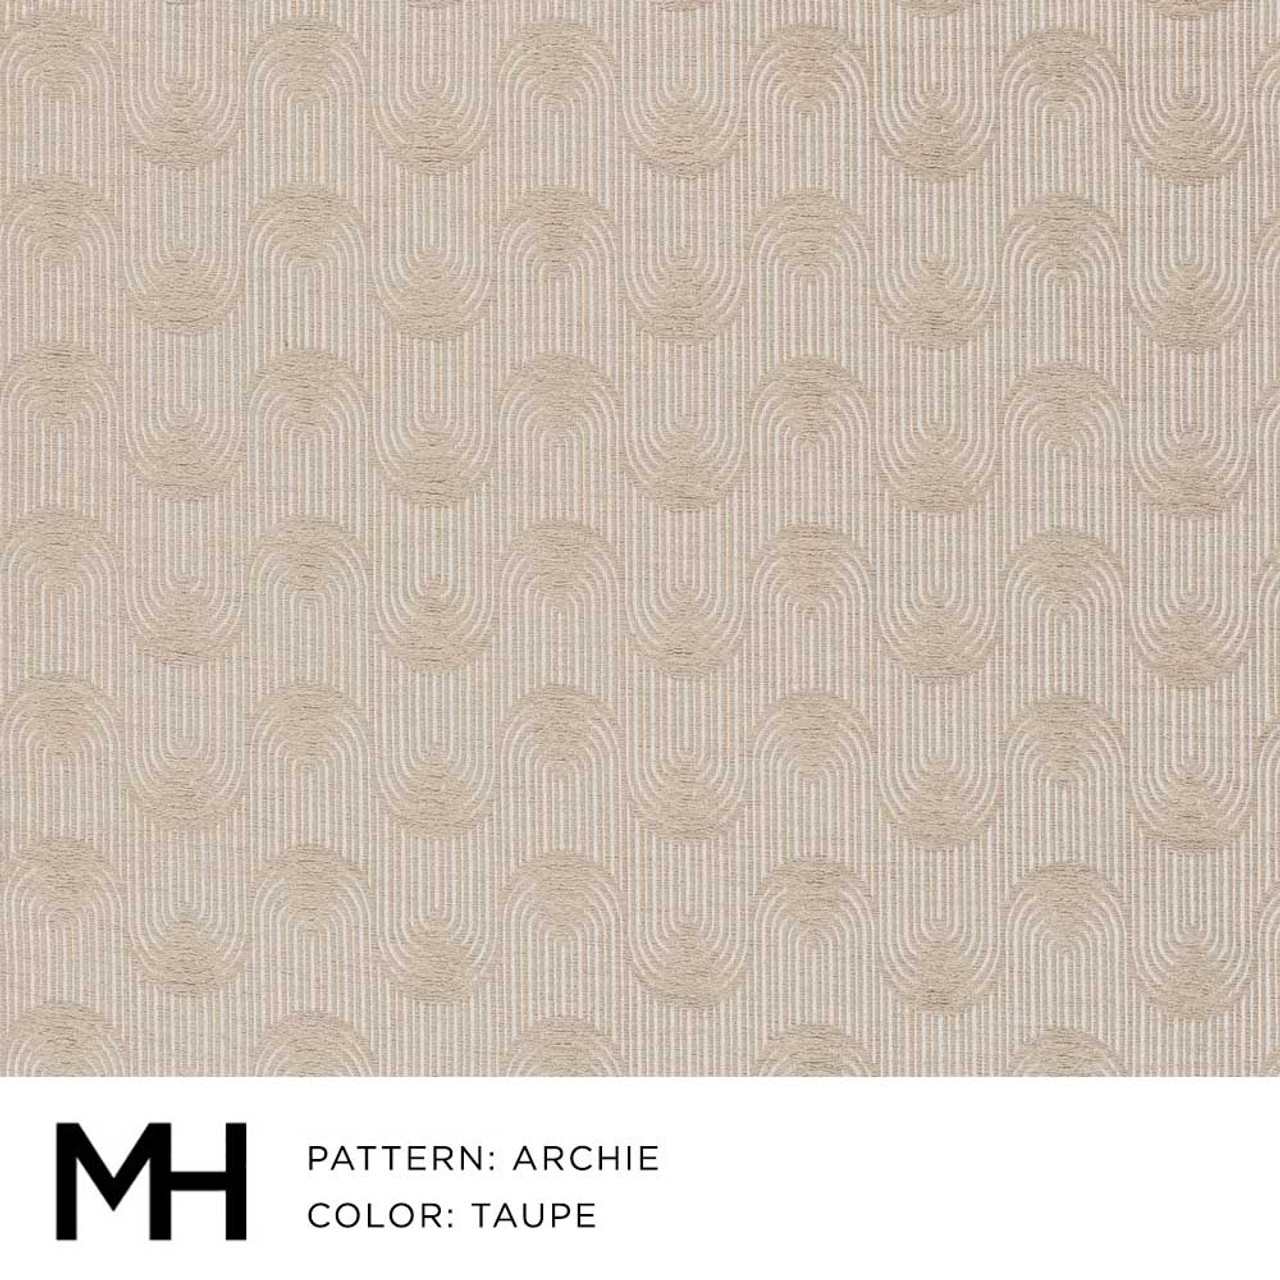 Moss Home  Made in the USA - Archie Taupe Swatch